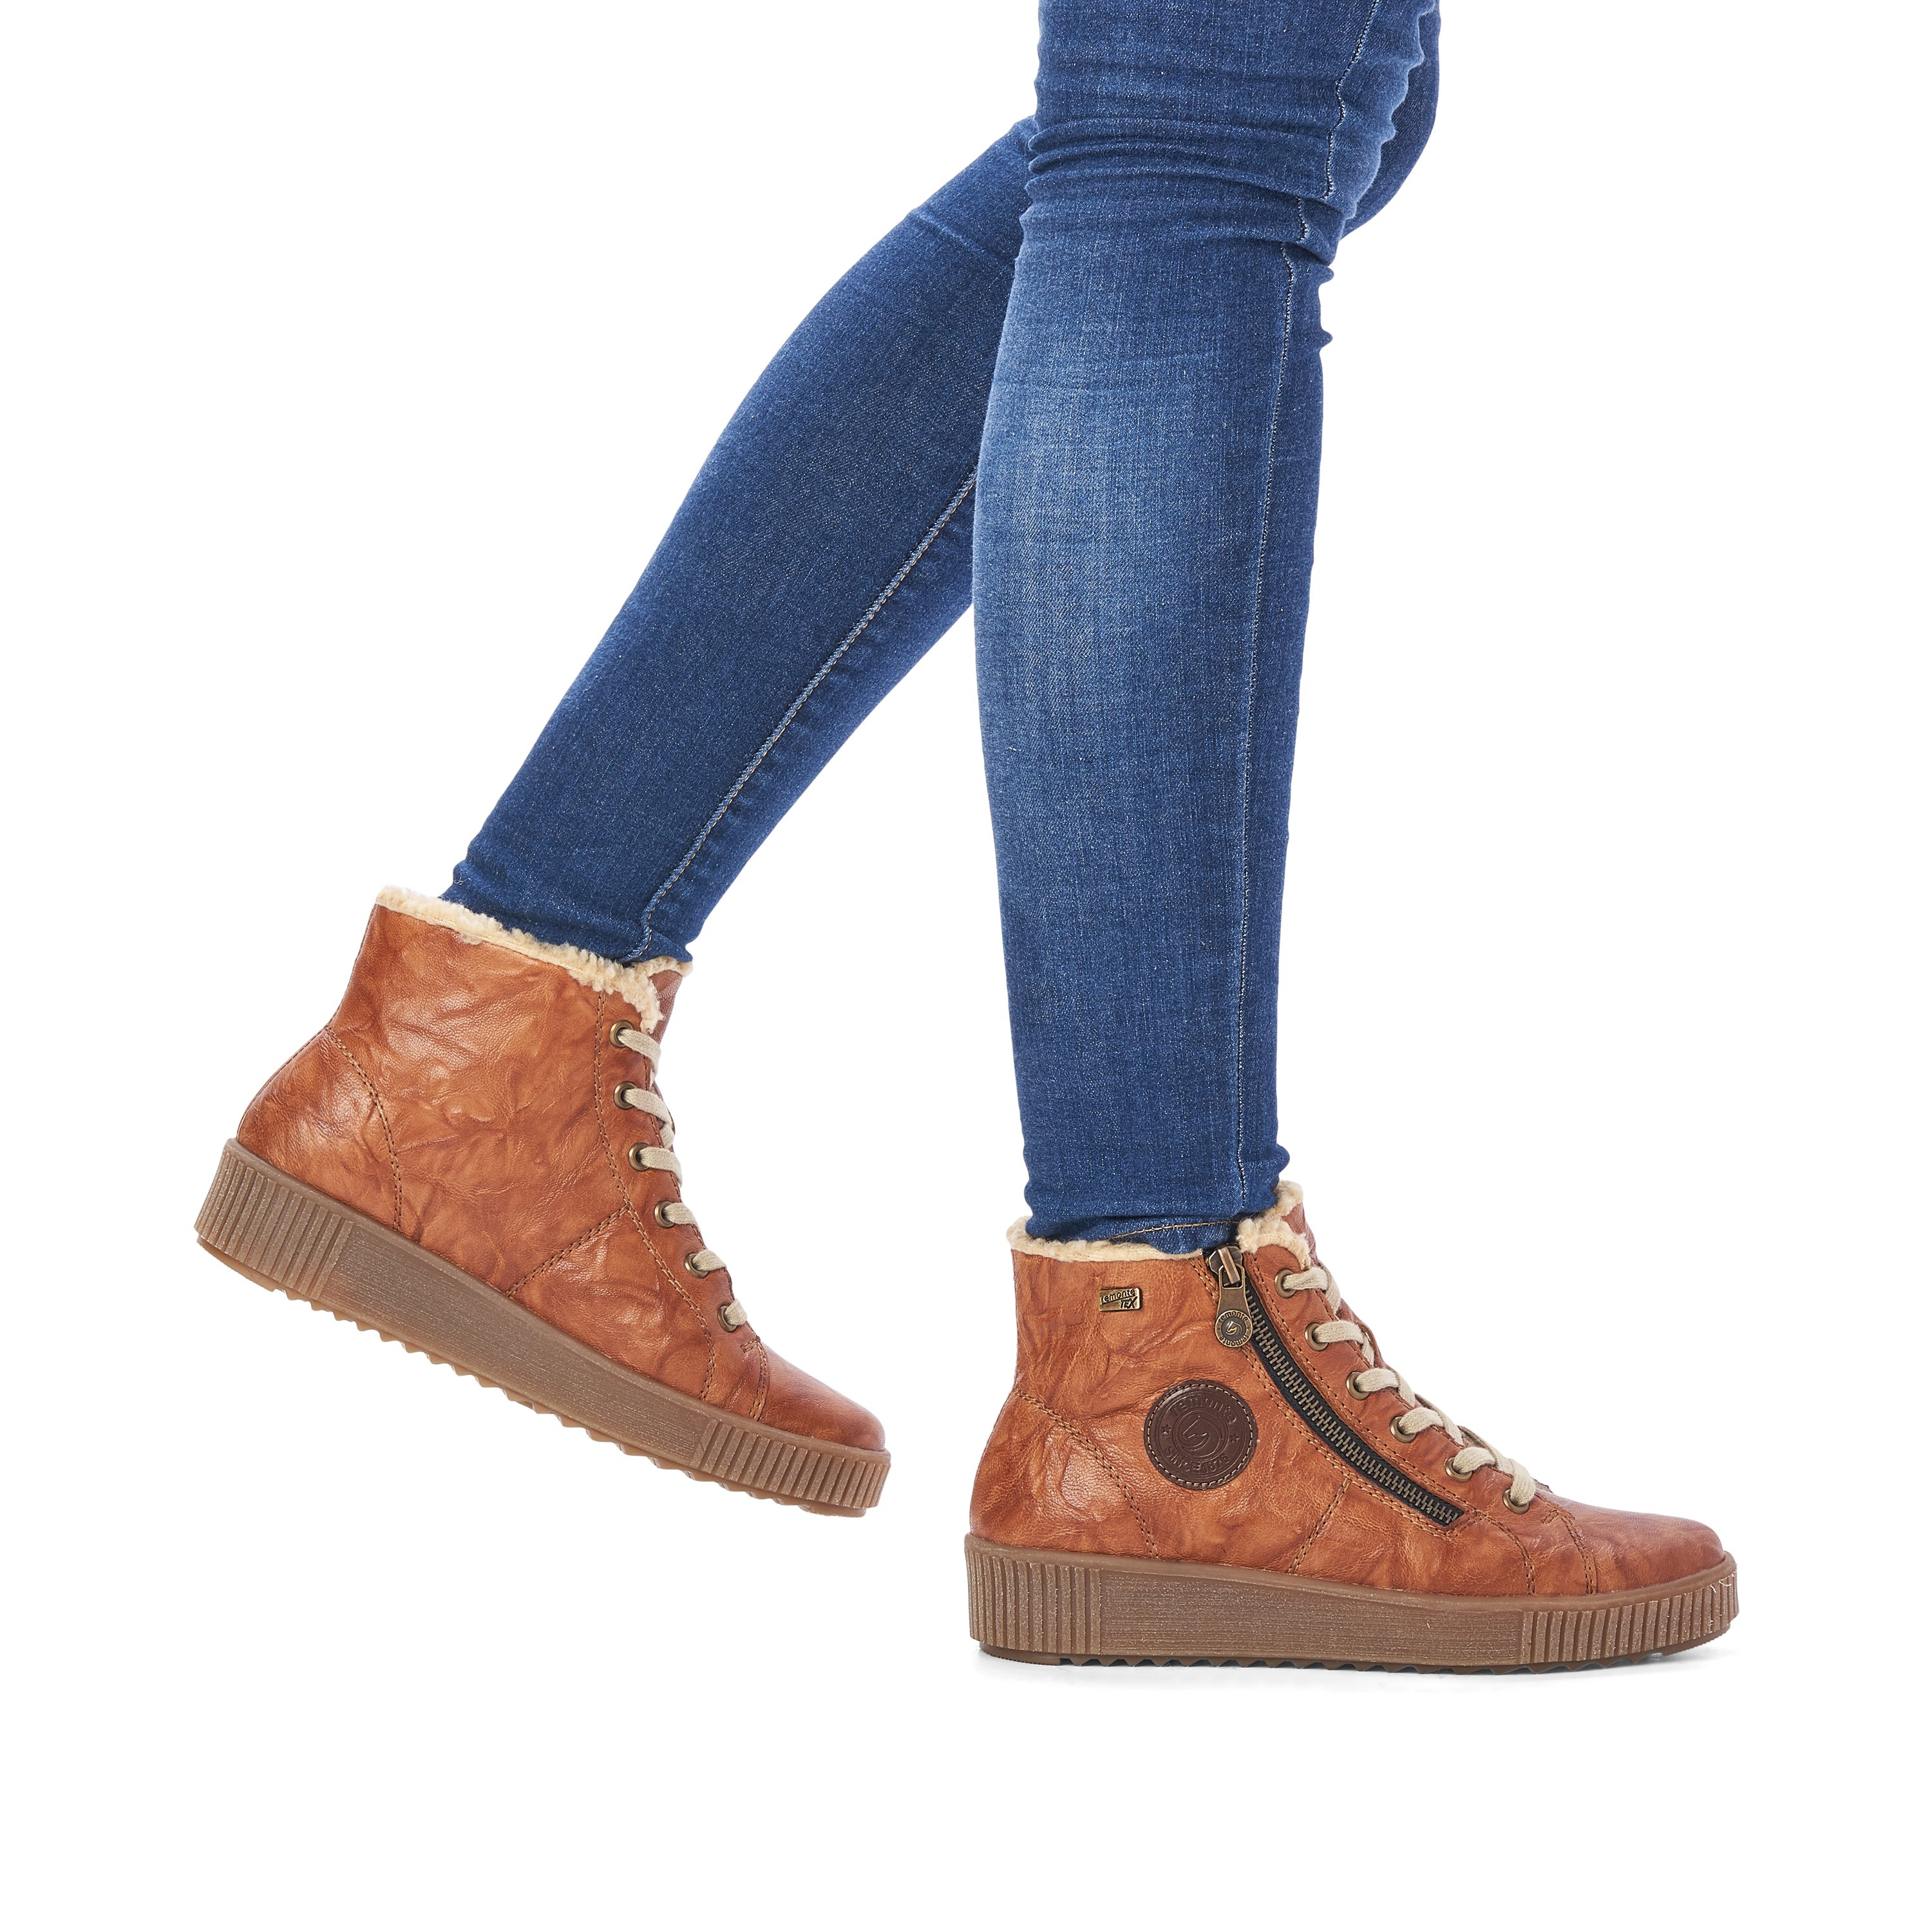 Wood brown remonte women´s lace-up boots R7980-23 with flexible platform sole. Shoe on foot